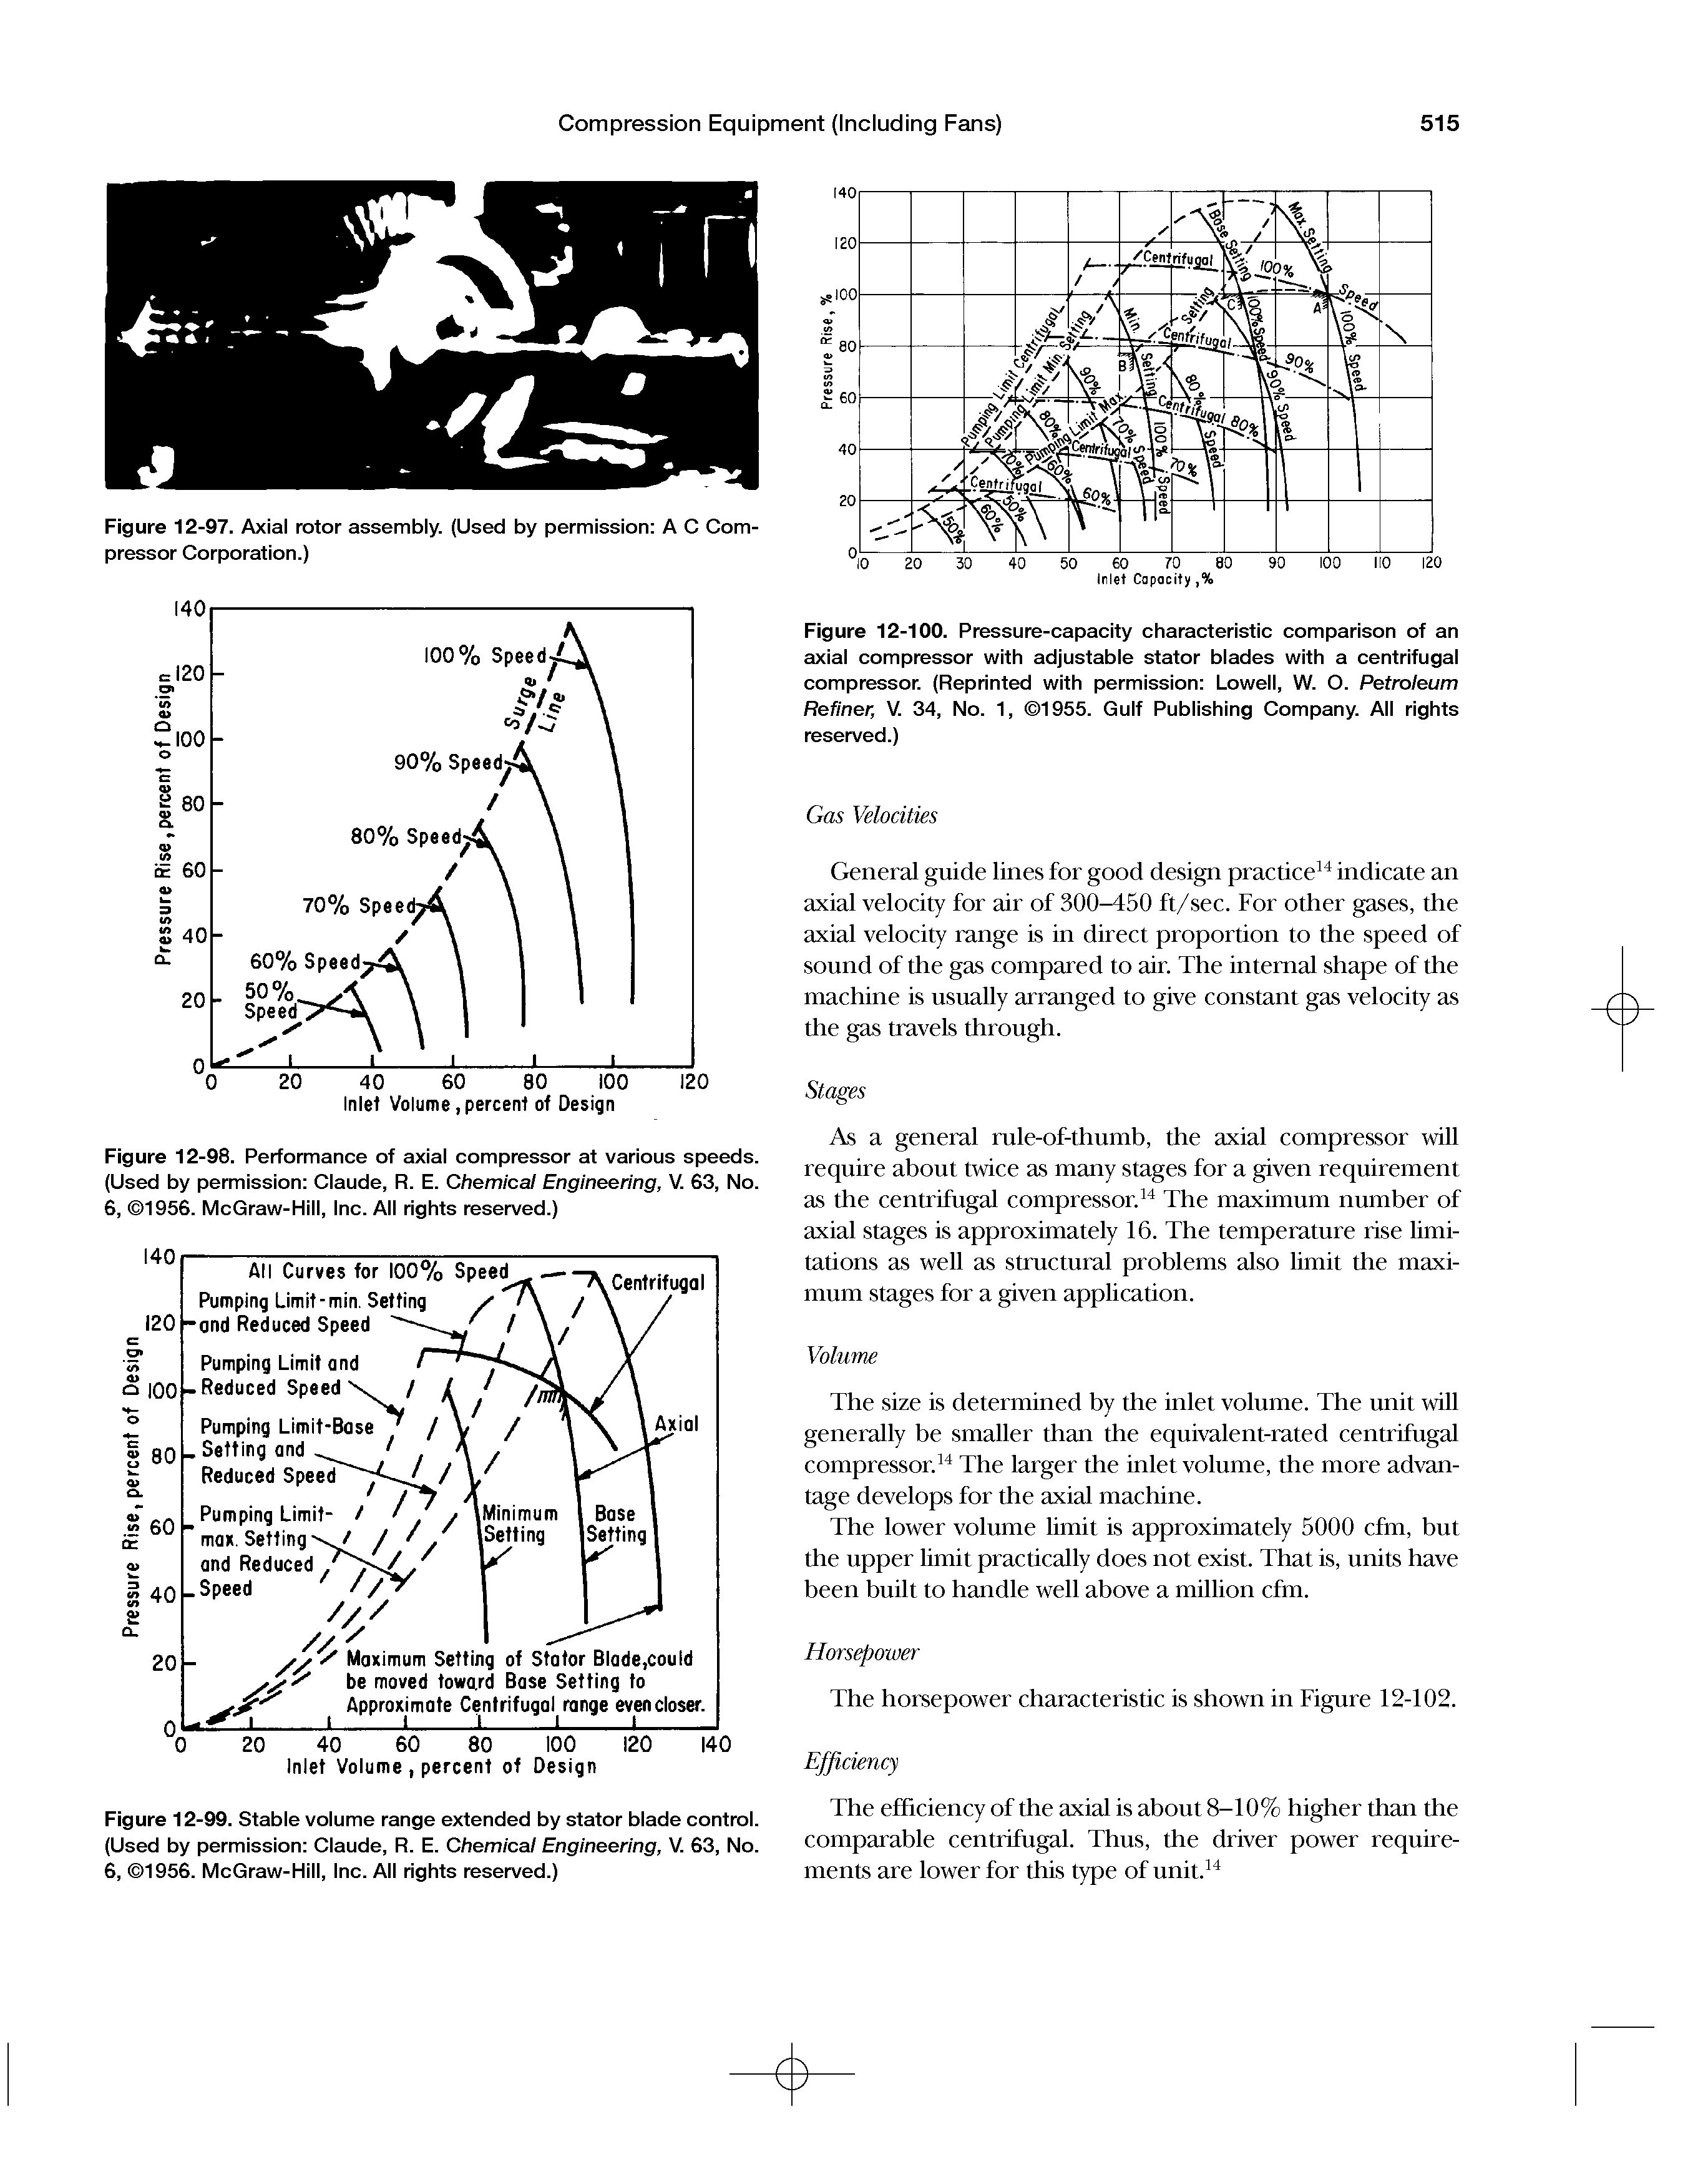 Figure 12-99. Stable volume range extended by stator blade control. (Used by permission Claude, R. E. Chemical Engineering, V. 63, No. 6, 1956. McGraw-Hill, Inc. All rights reserved.)...